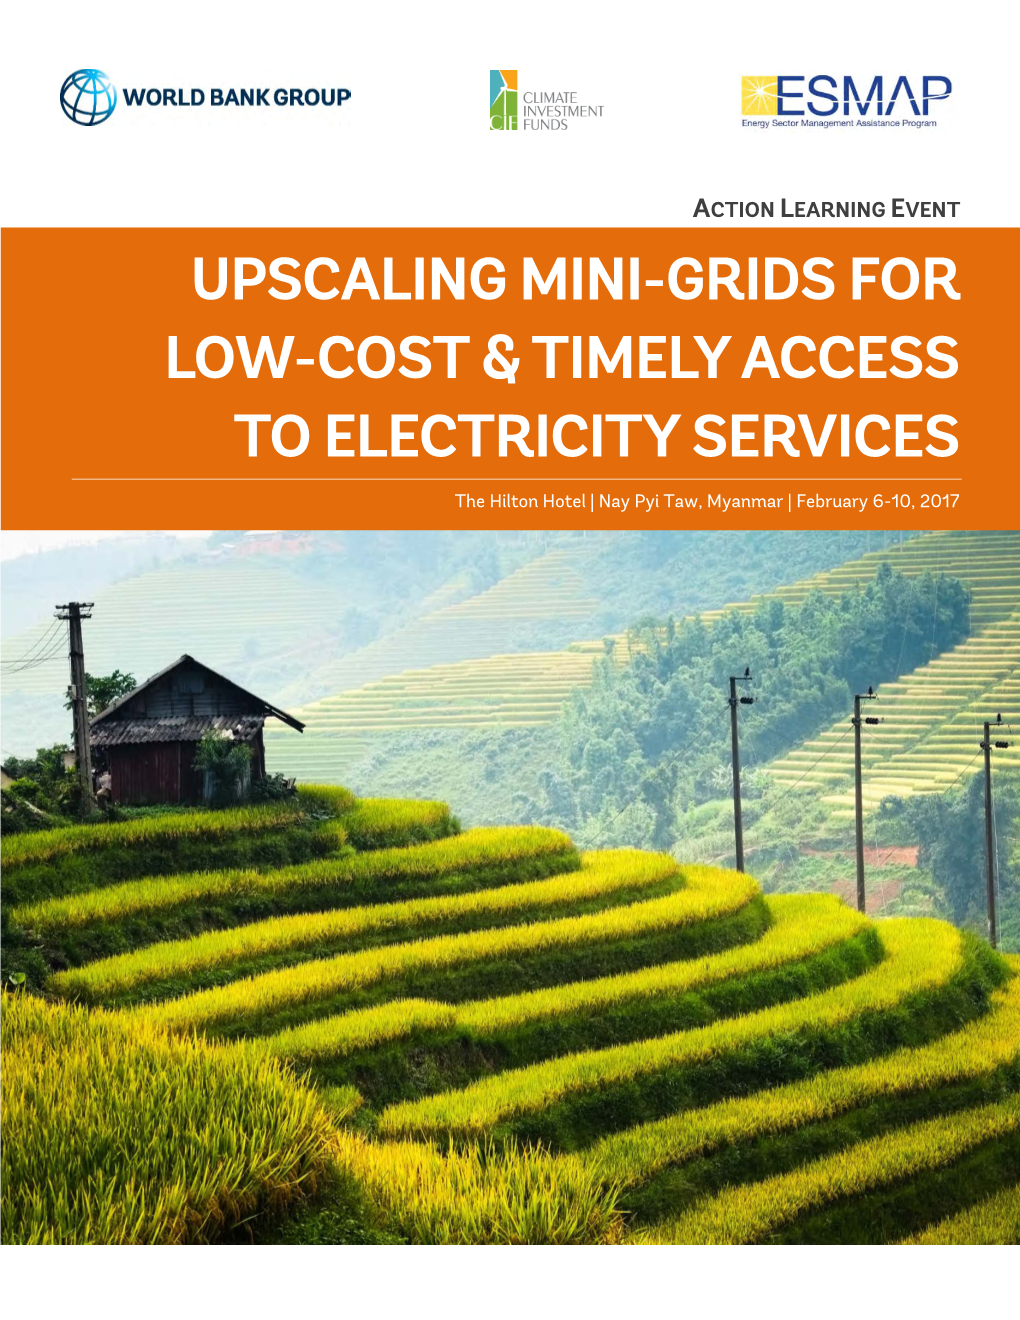 Upscaling Mini-Grids for Low-Cost & Timely Access to Electricity Services